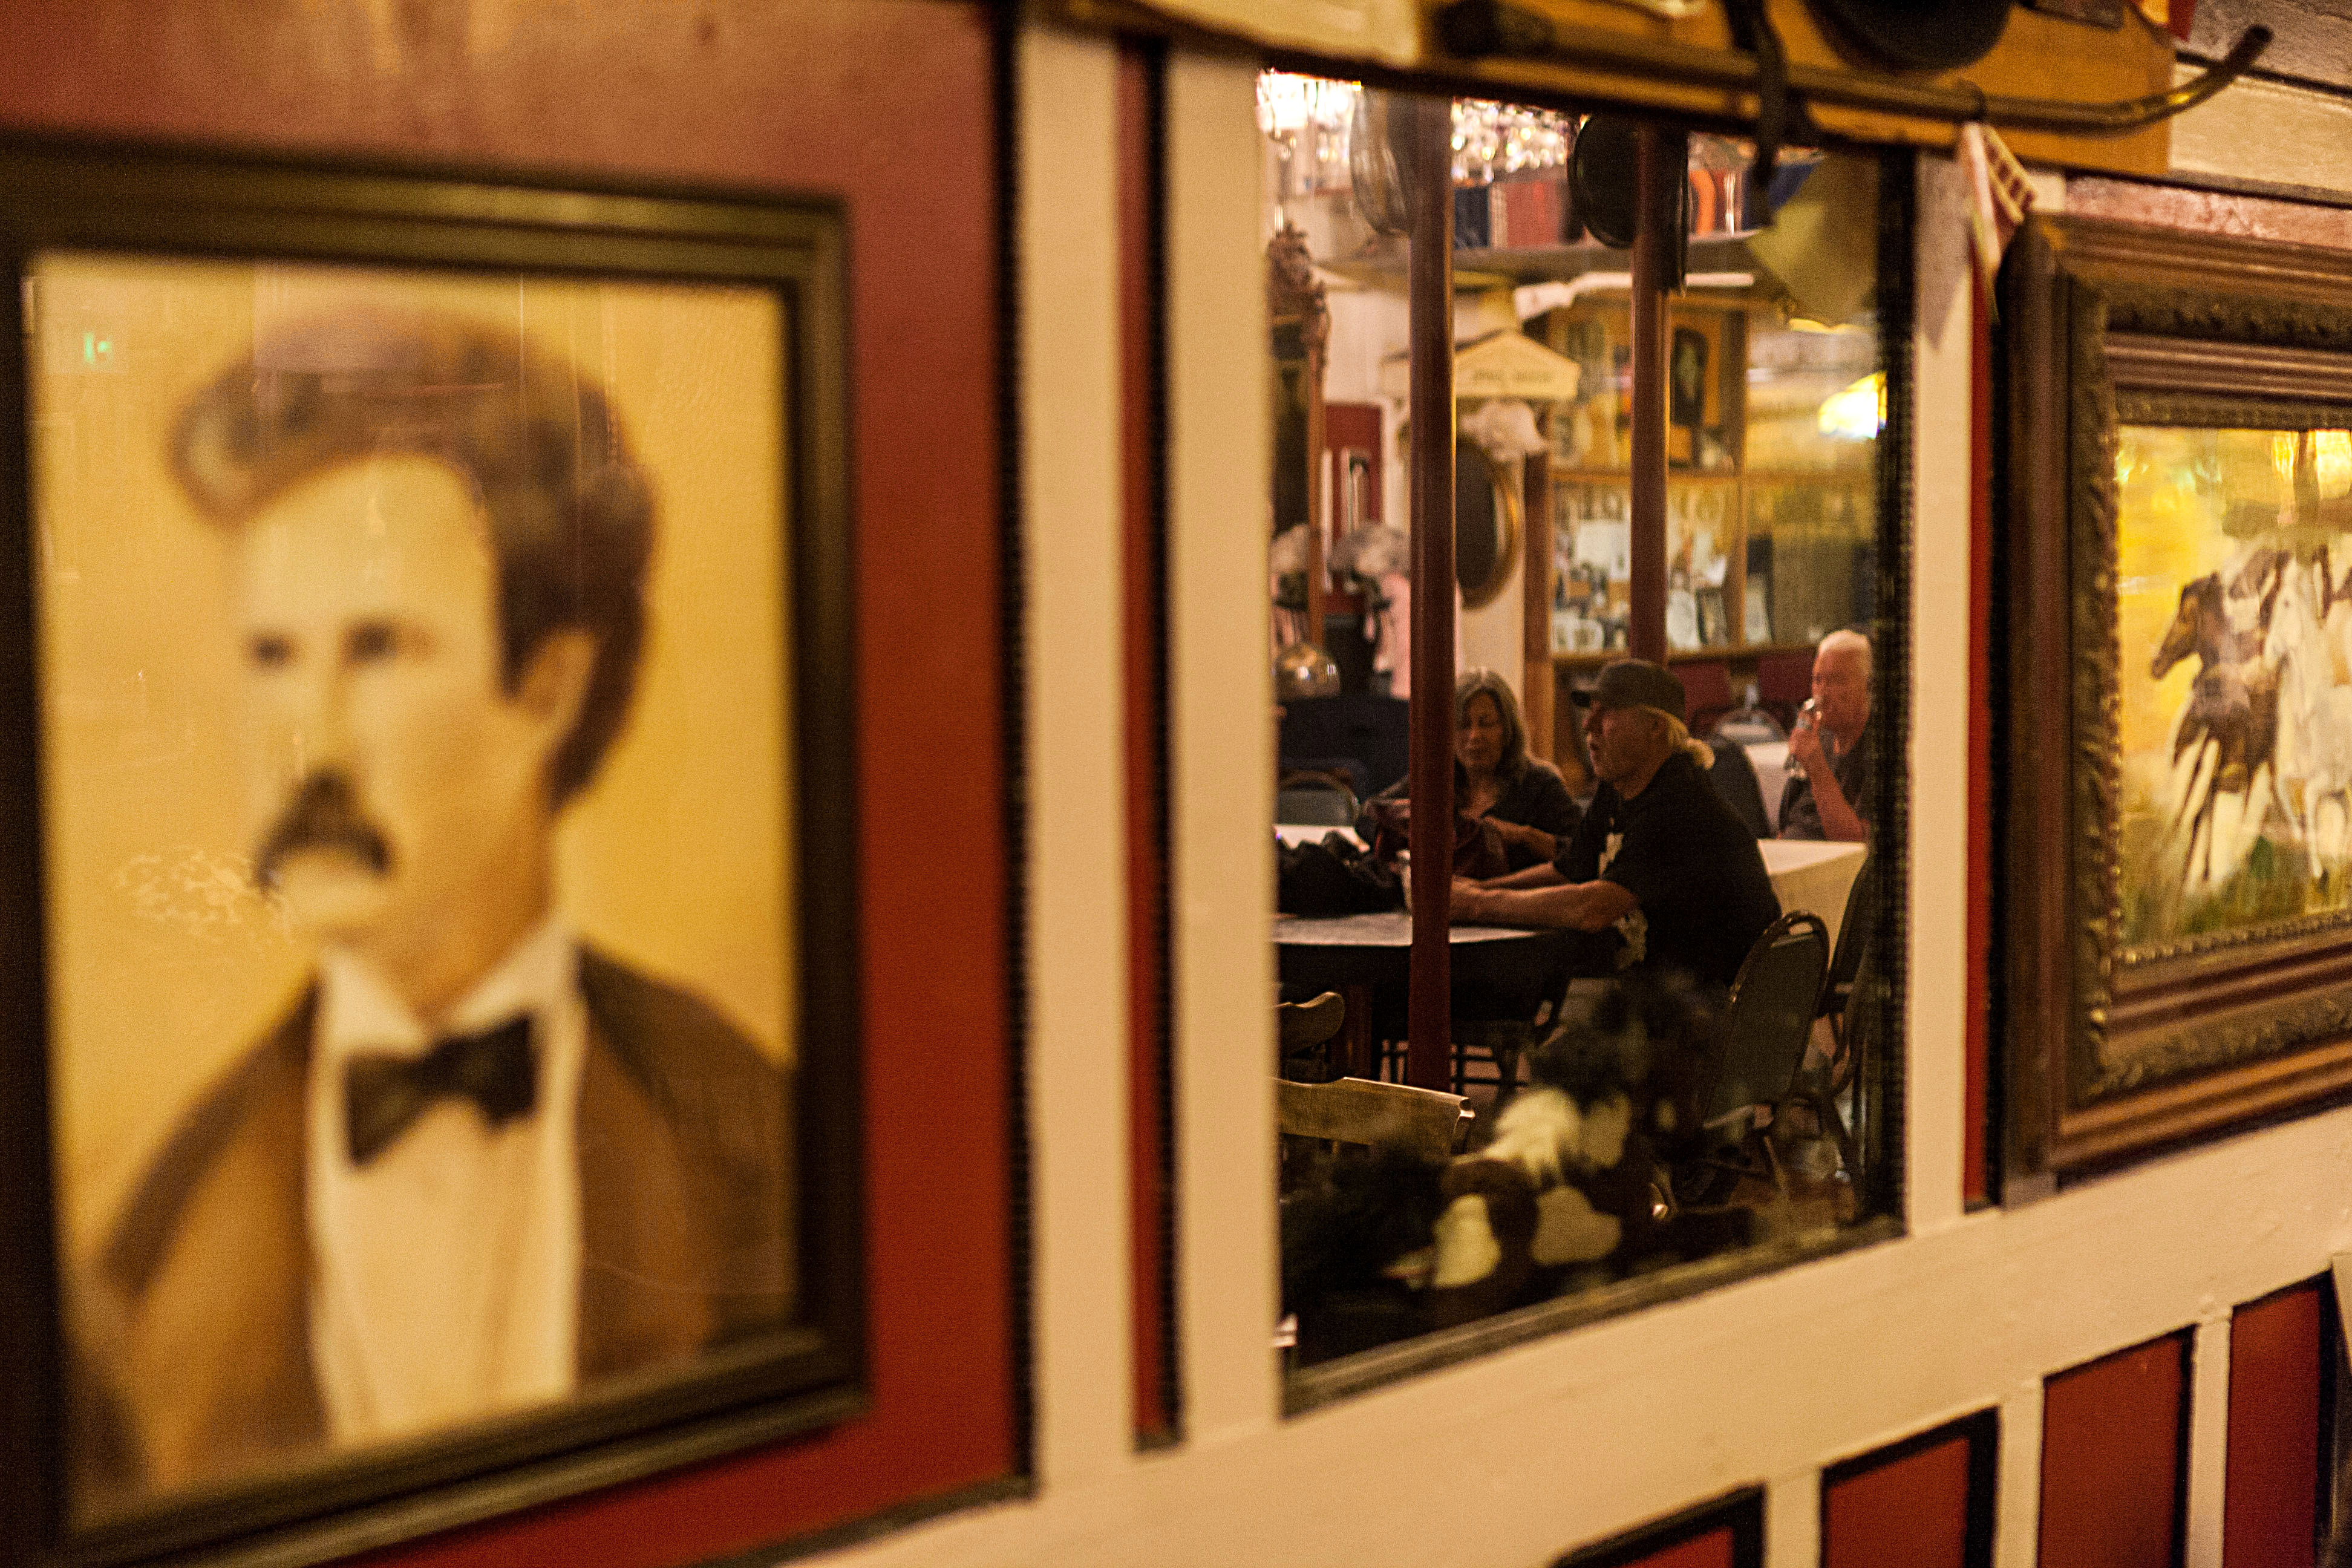 Virginia City's saloons are the best place to enjoy something Wild West atmosphere, just as Mark Twain (pictured left) did as a reporter for the local newspaper. Image by Alexander Howard / Lonely Planet